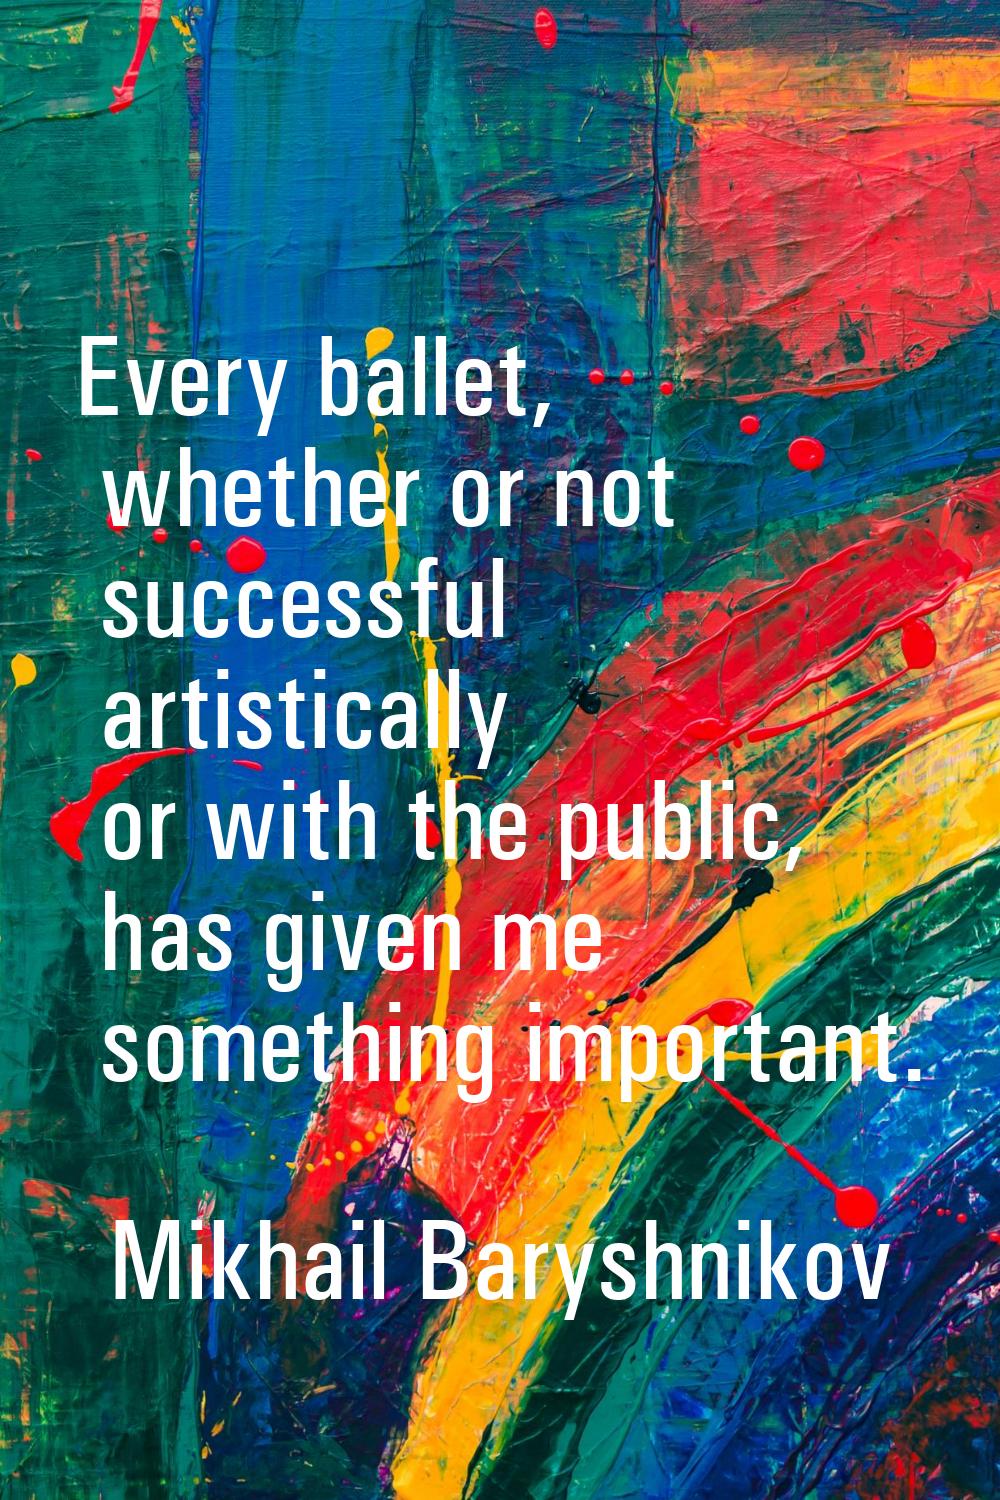 Every ballet, whether or not successful artistically or with the public, has given me something imp